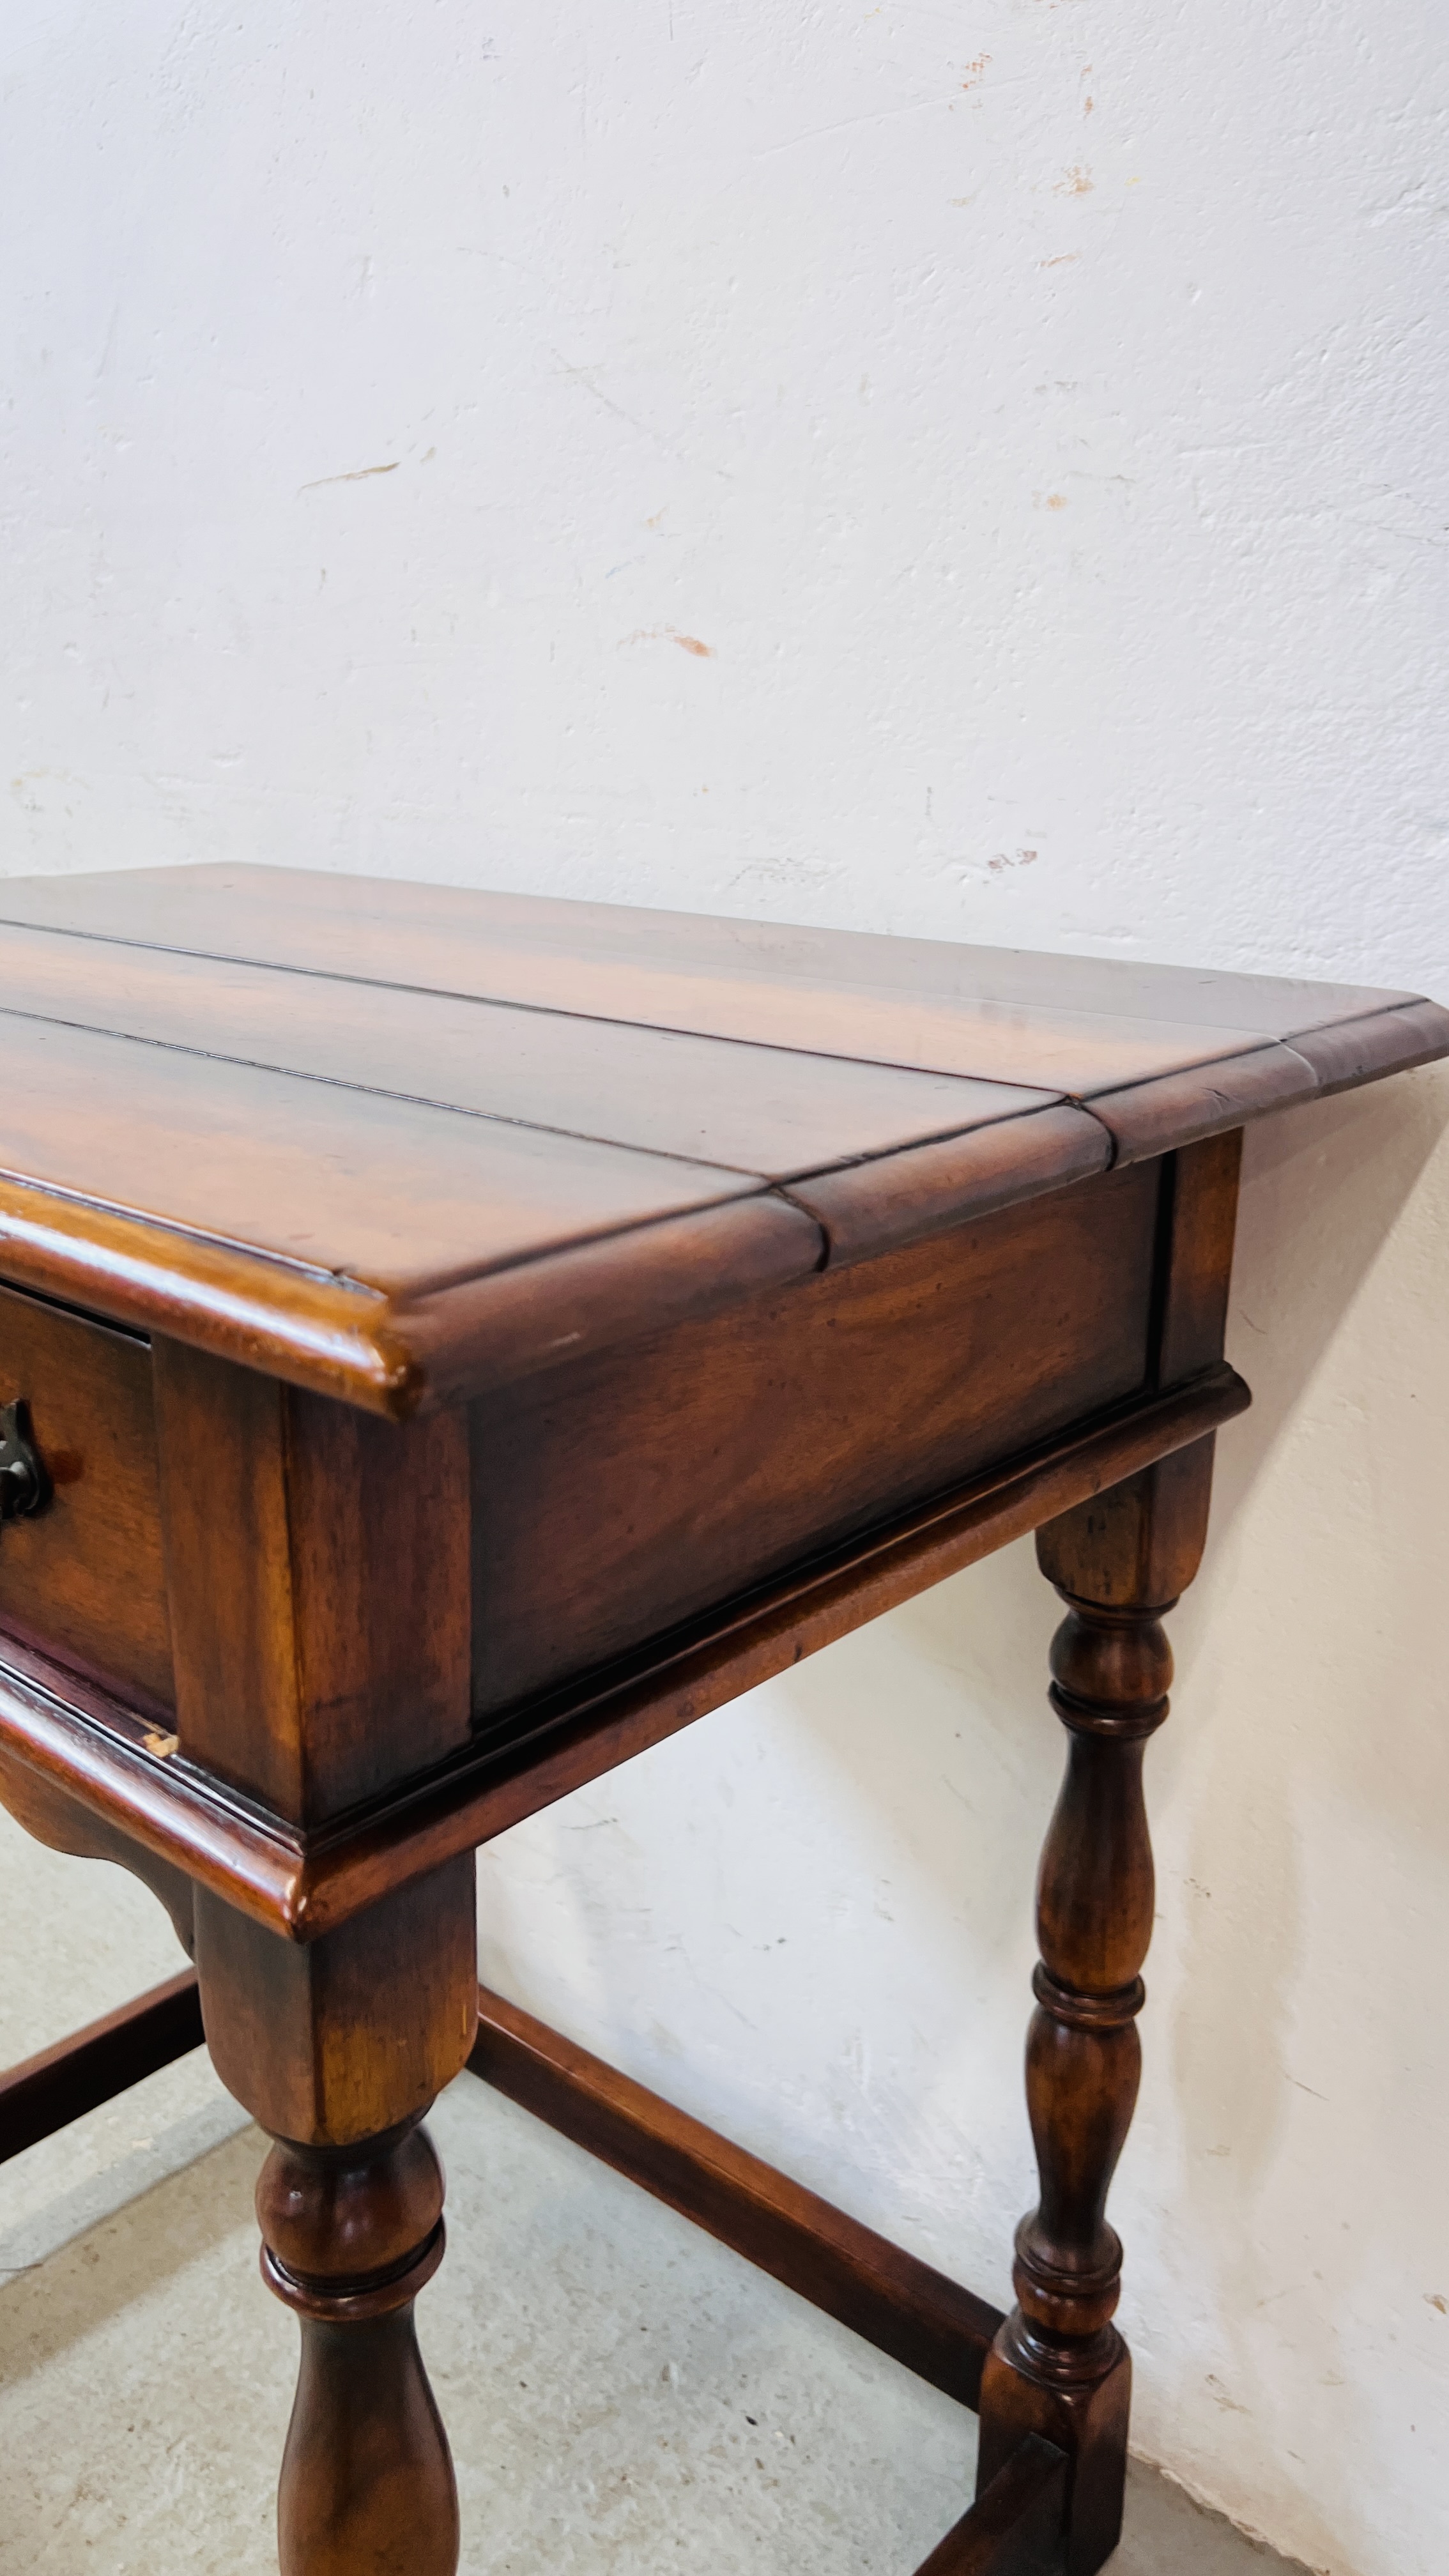 A GOOD QUALITY REPRODUCTION HARDWOOD SINGLE DRAWER SIDE TABLE W 73CM. D 49CM. H 73CM. - Image 6 of 9